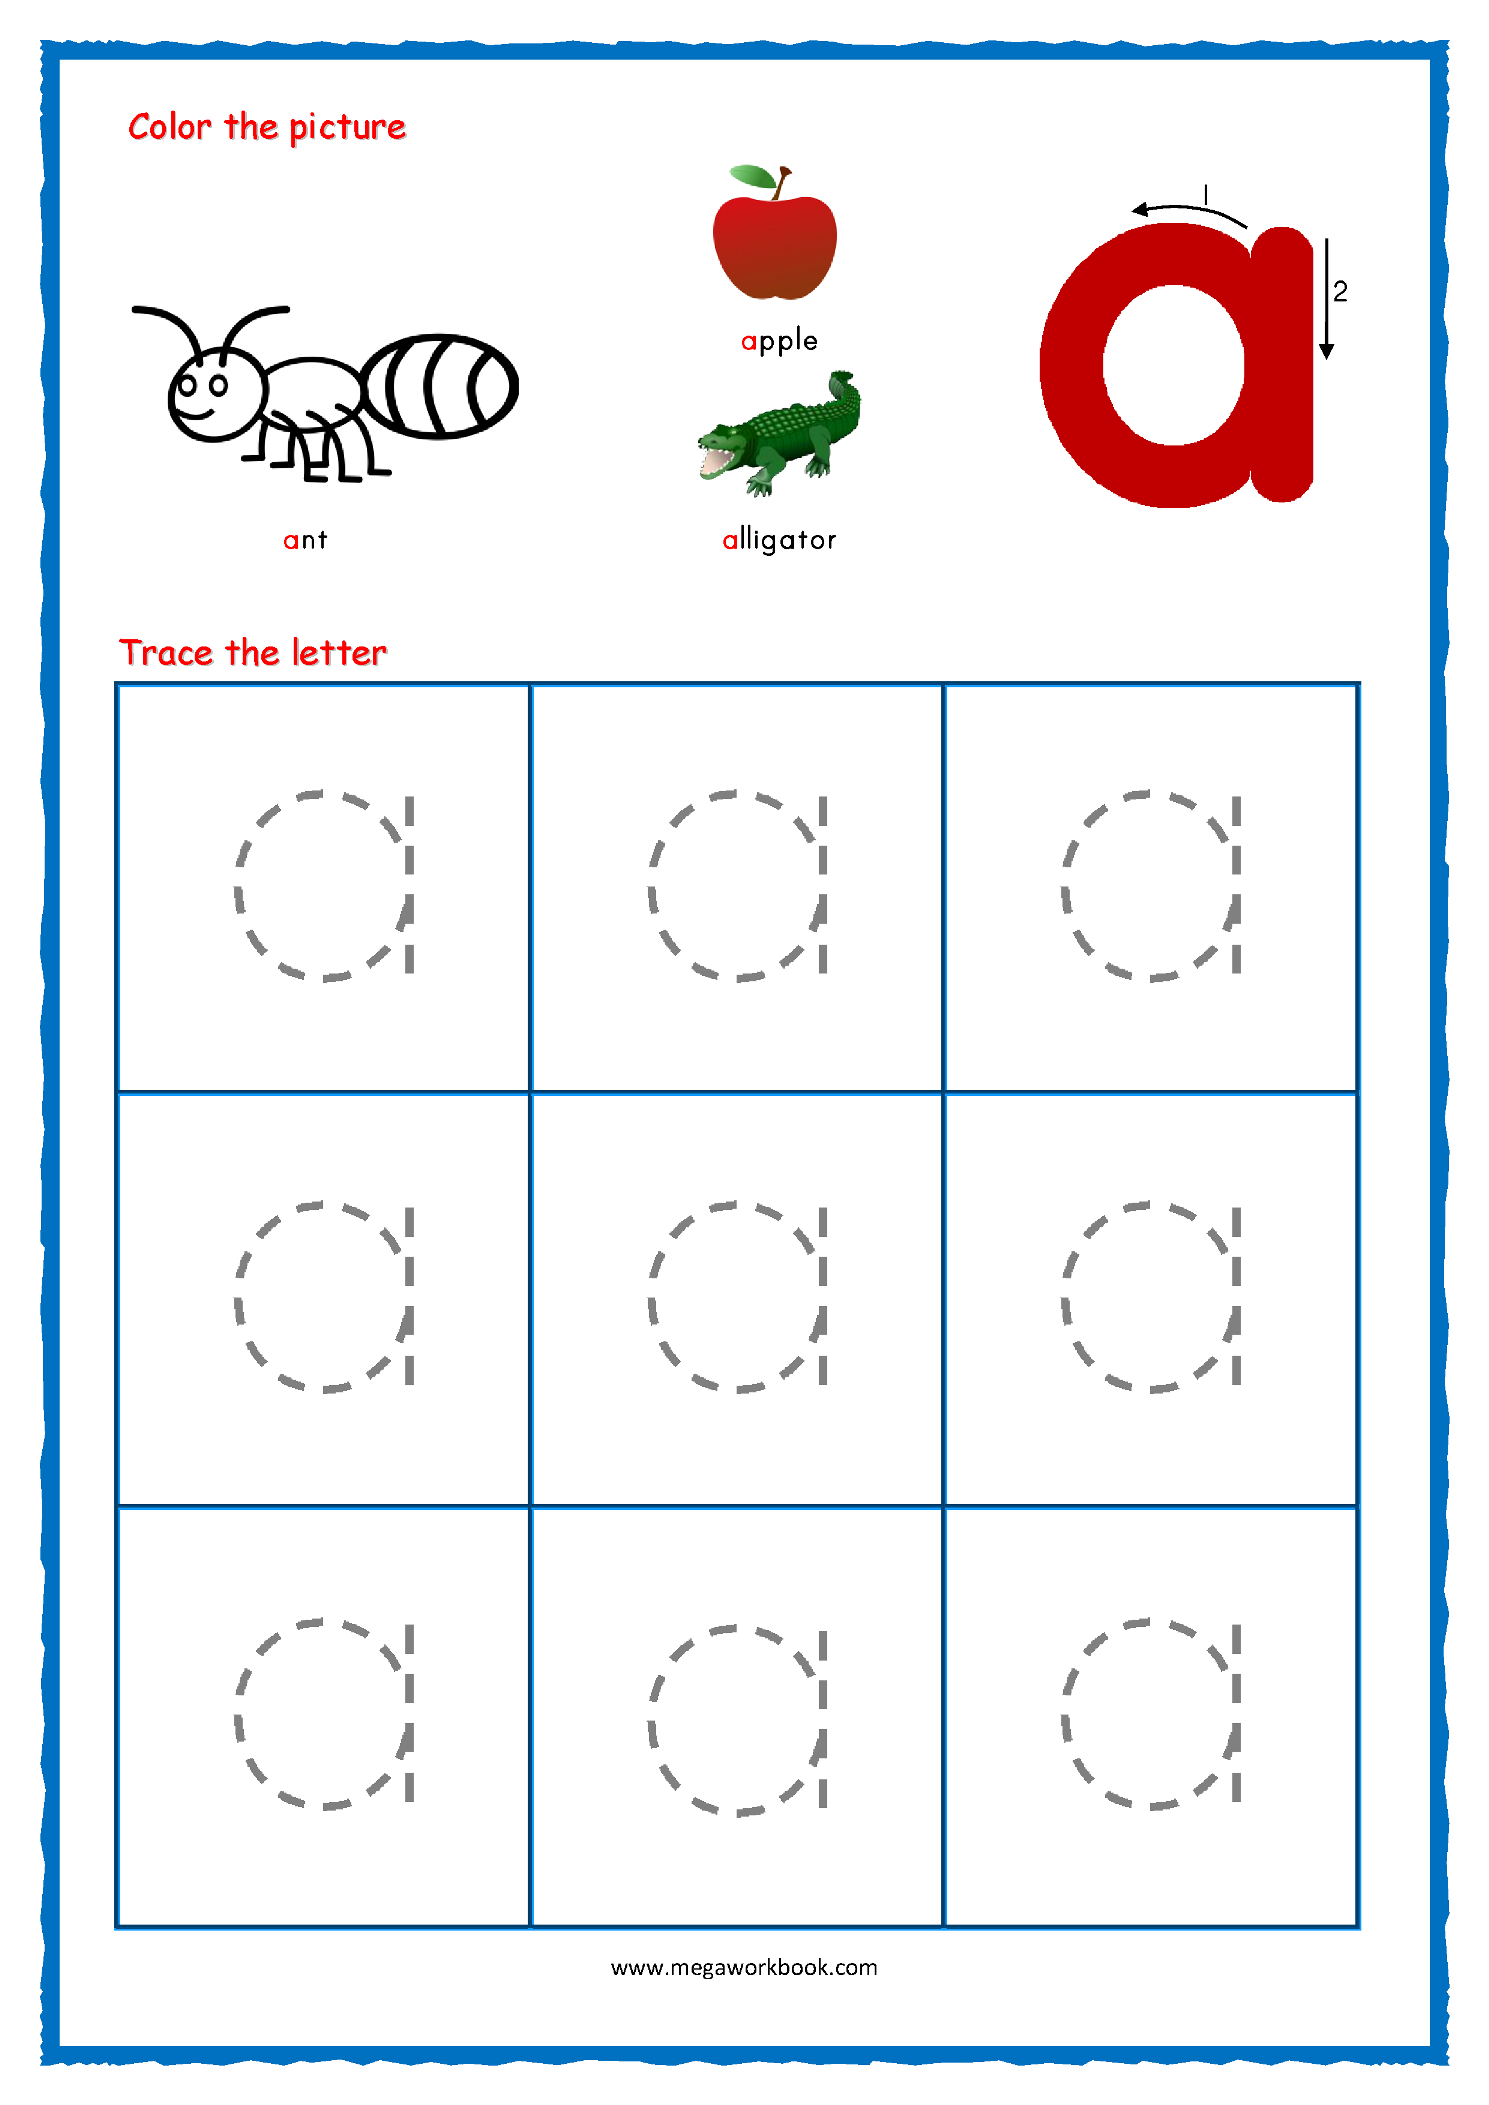 Traceable Lower Case Letters for Tracing Lowercase Letters